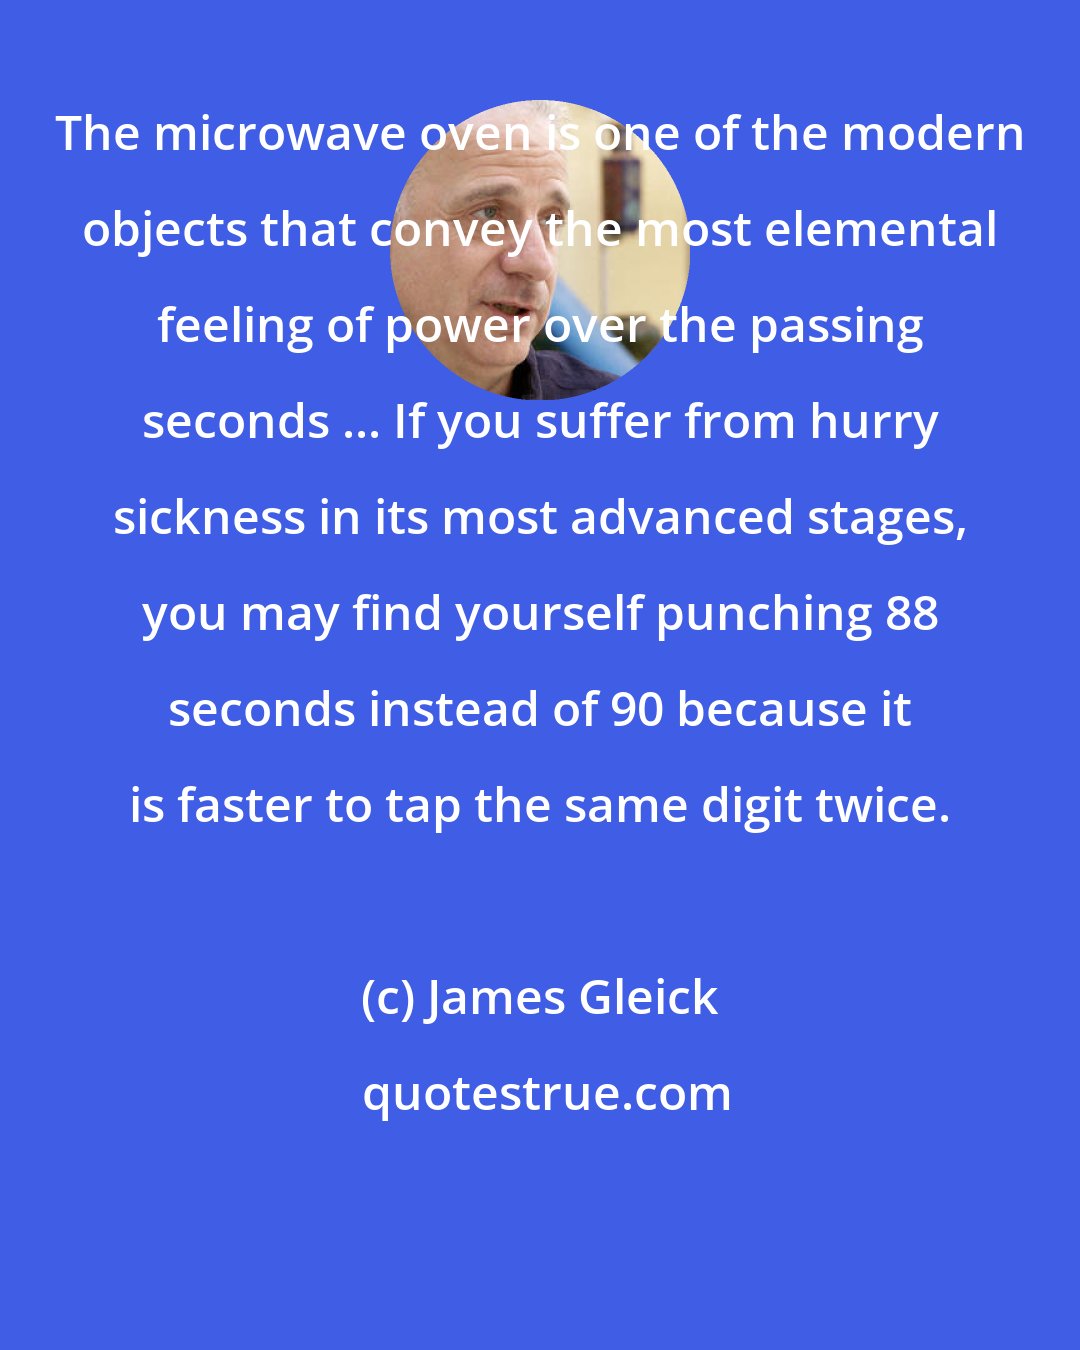 James Gleick: The microwave oven is one of the modern objects that convey the most elemental feeling of power over the passing seconds ... If you suffer from hurry sickness in its most advanced stages, you may find yourself punching 88 seconds instead of 90 because it is faster to tap the same digit twice.